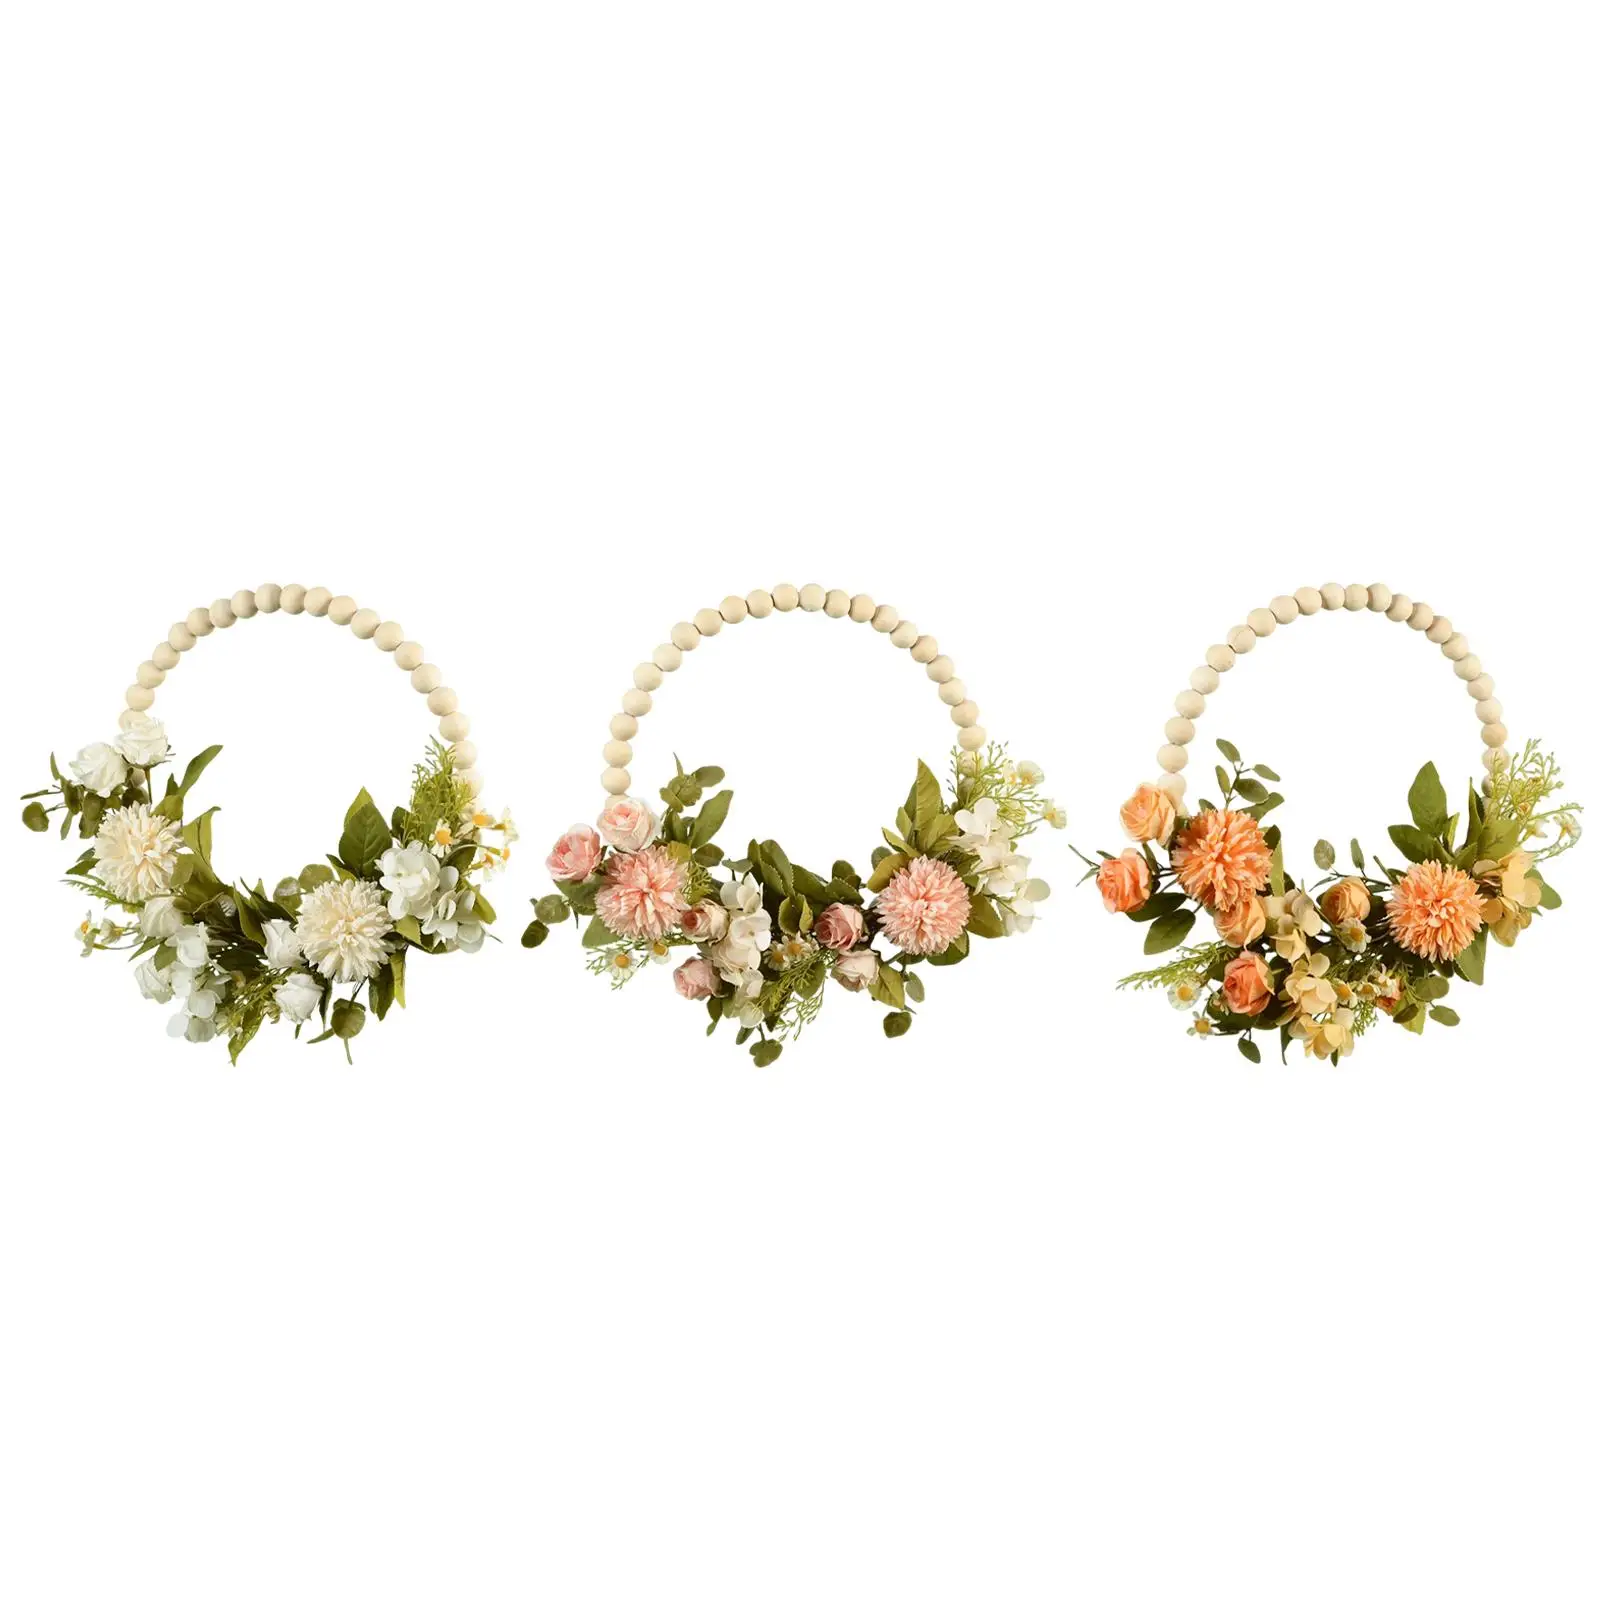 Artificial Flower Wreath Garland Wood Beads Hoop Wall Hanging Greenery Leaves for Indoor Farmhouse Fireplace Party Decor